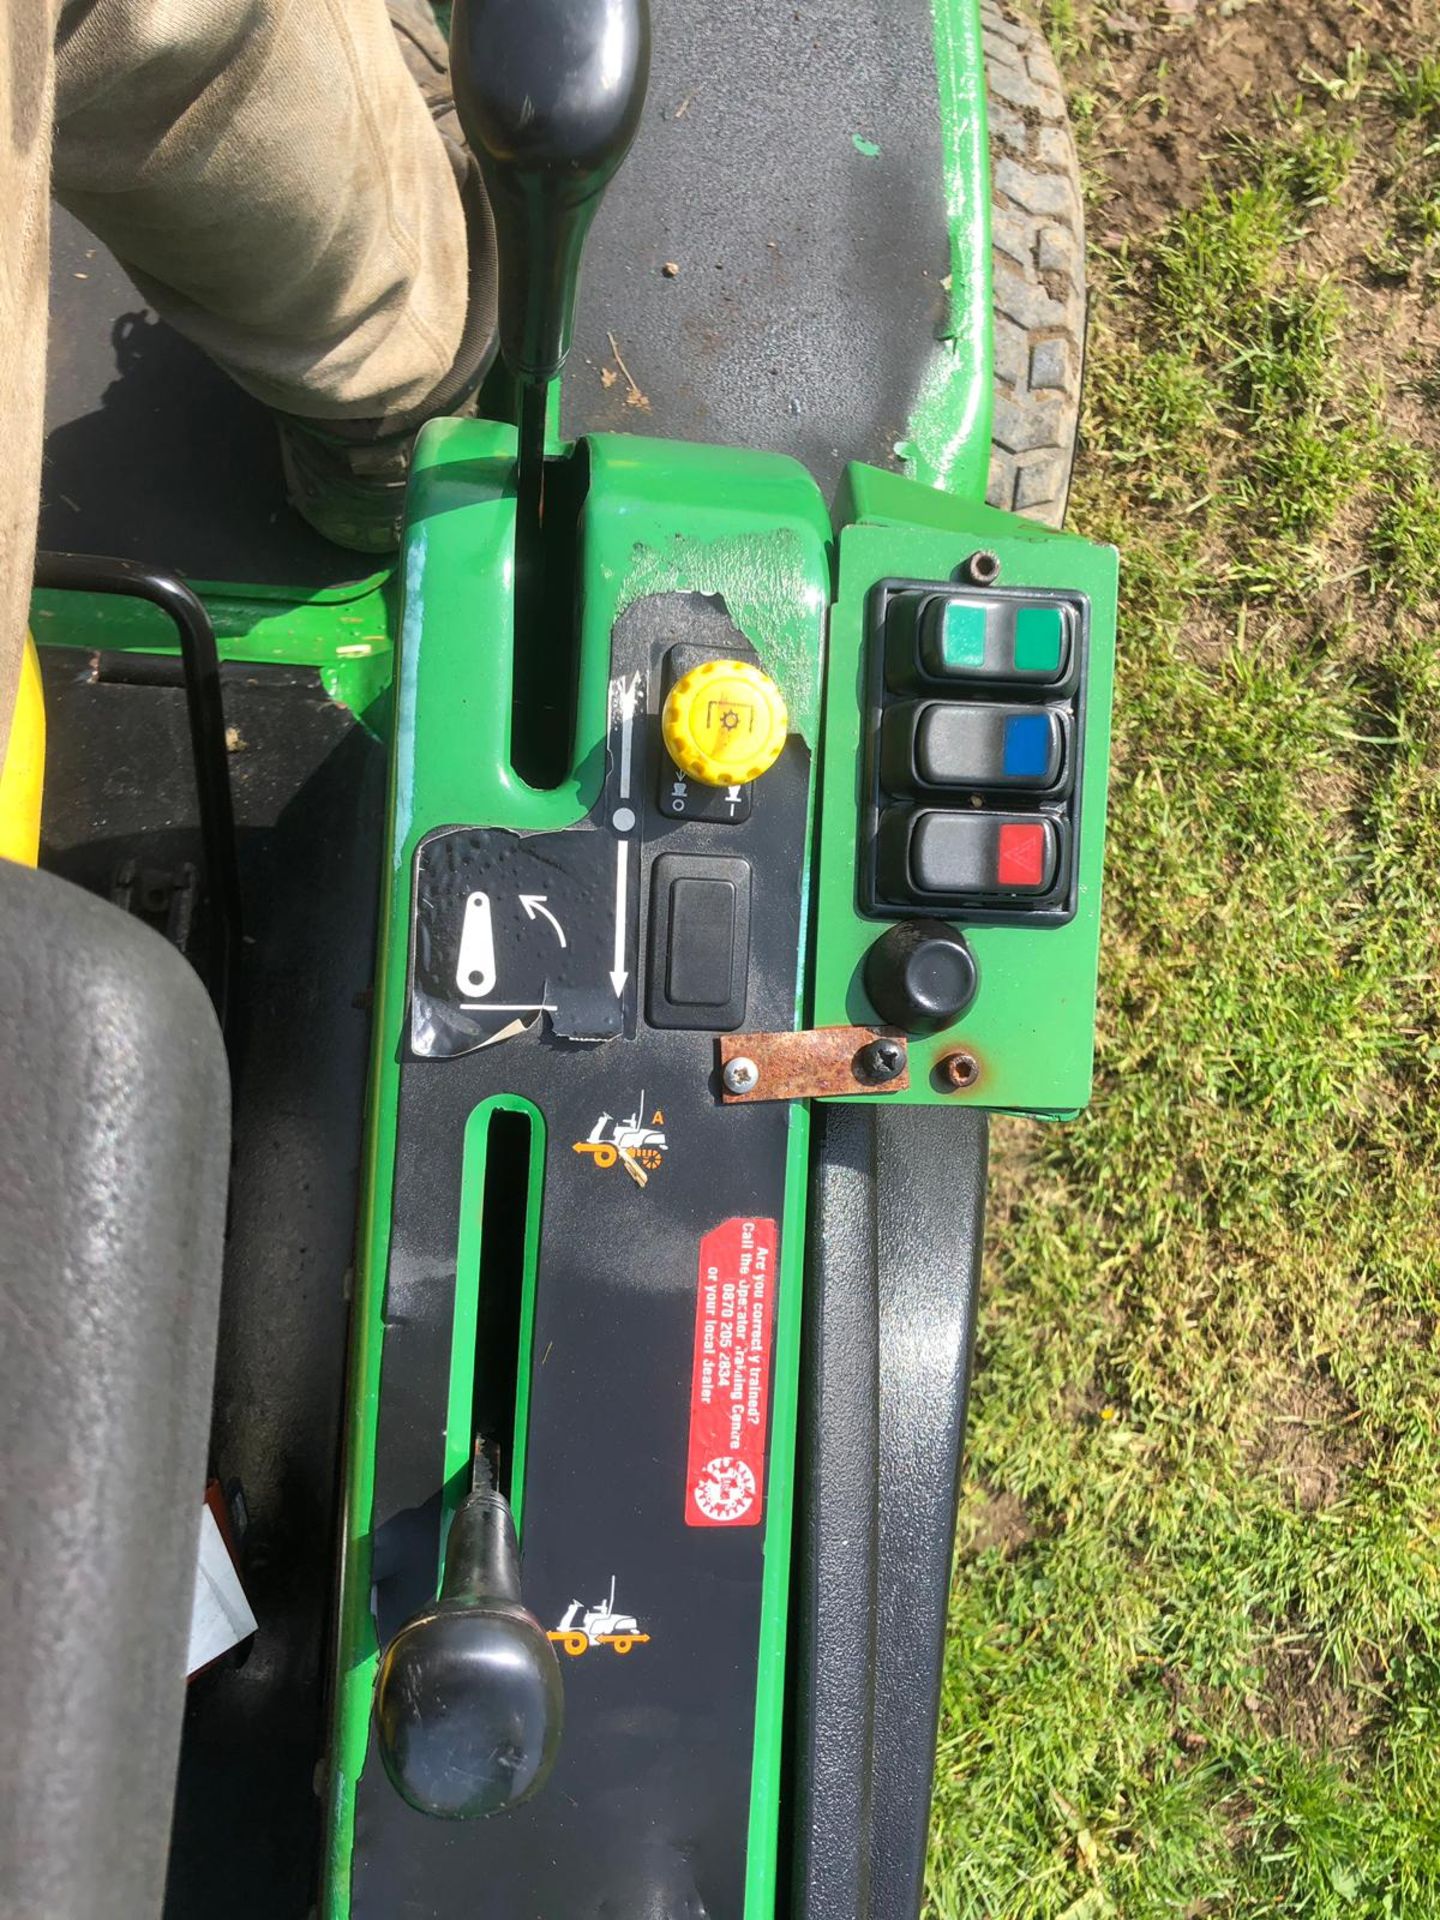 JOHN DEERE 1445 RIDE ON LAWN MOWER WITH FLAIL MOWER, YEAR 2008, RUNS, WORKS AND CUTS *PLUS VAT* - Image 6 of 7